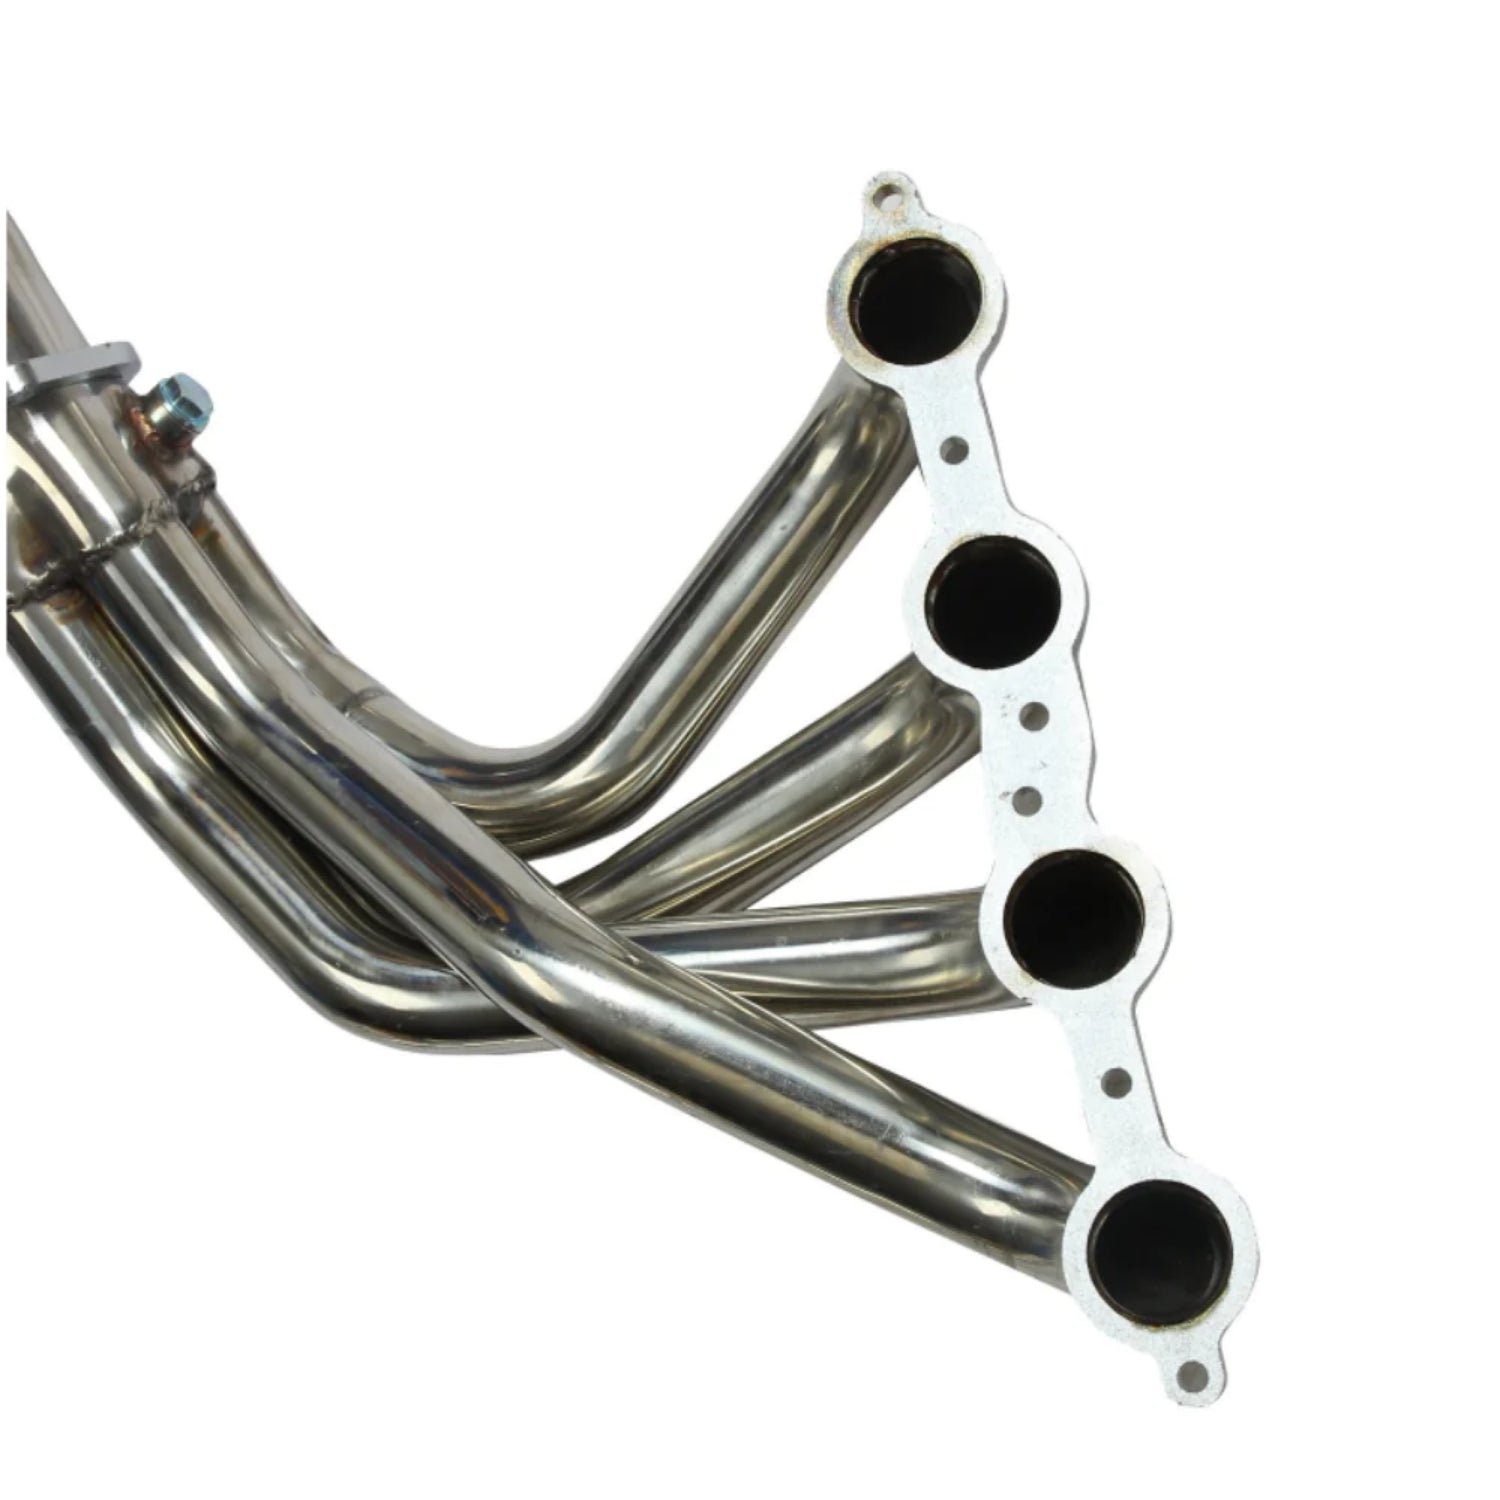 Stainless Exhaust Headers Manifolds & X Pipe for 2005-2013 Chevy Corvette C6 LS2 LS3